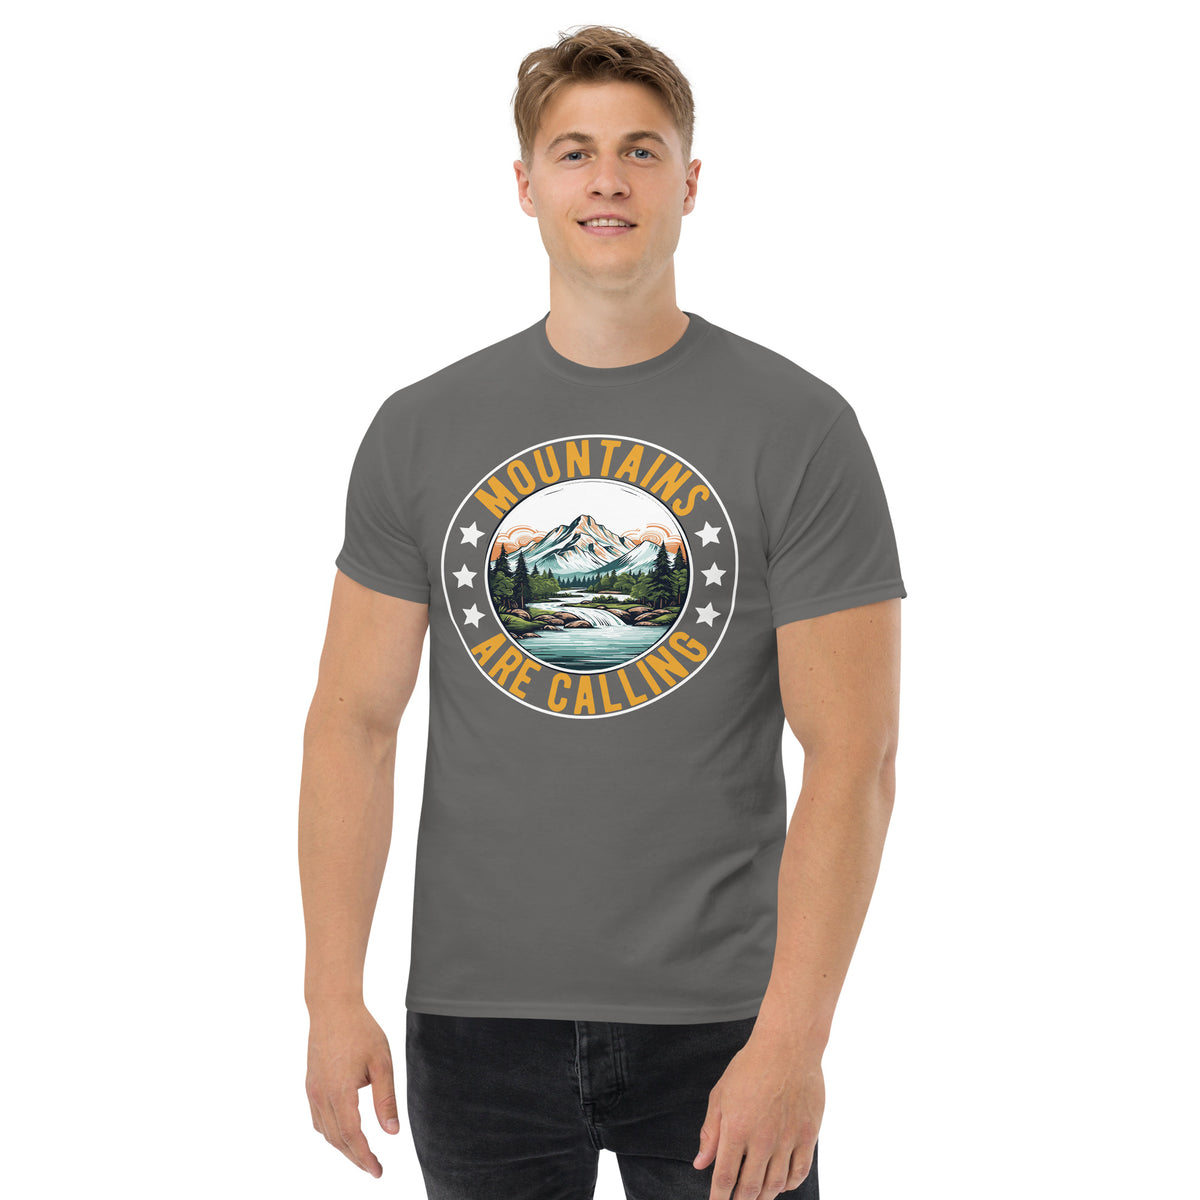 T-Shirt Outdoor & Wandern "Mountains are calling " Variante 2